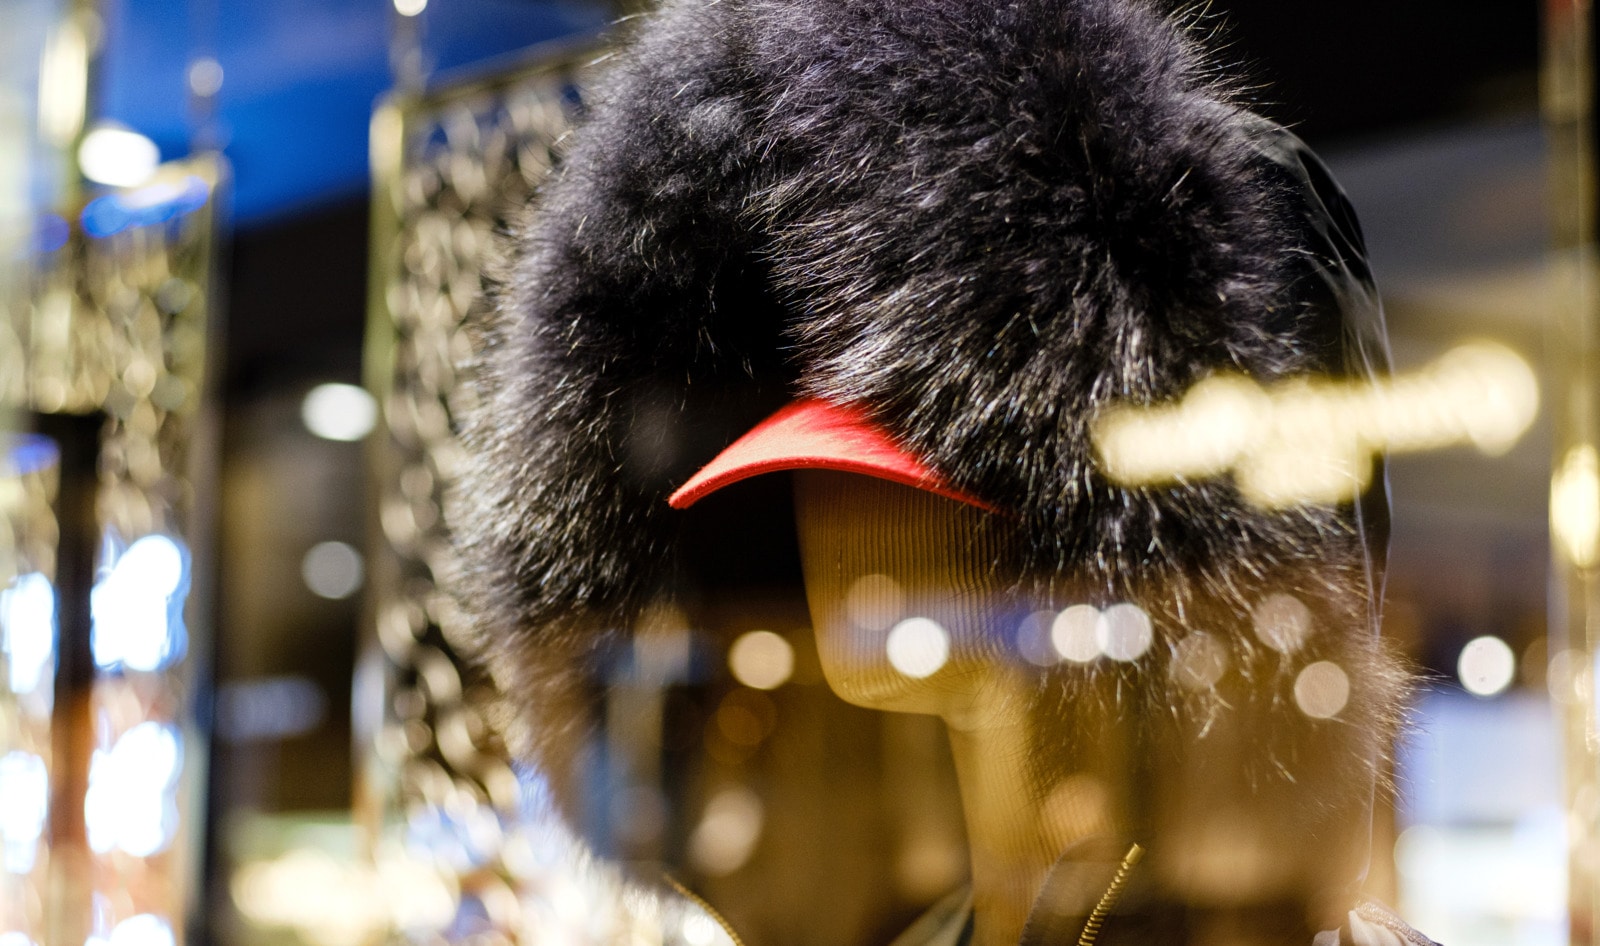 World’s Largest Fur Auction House Is Closing